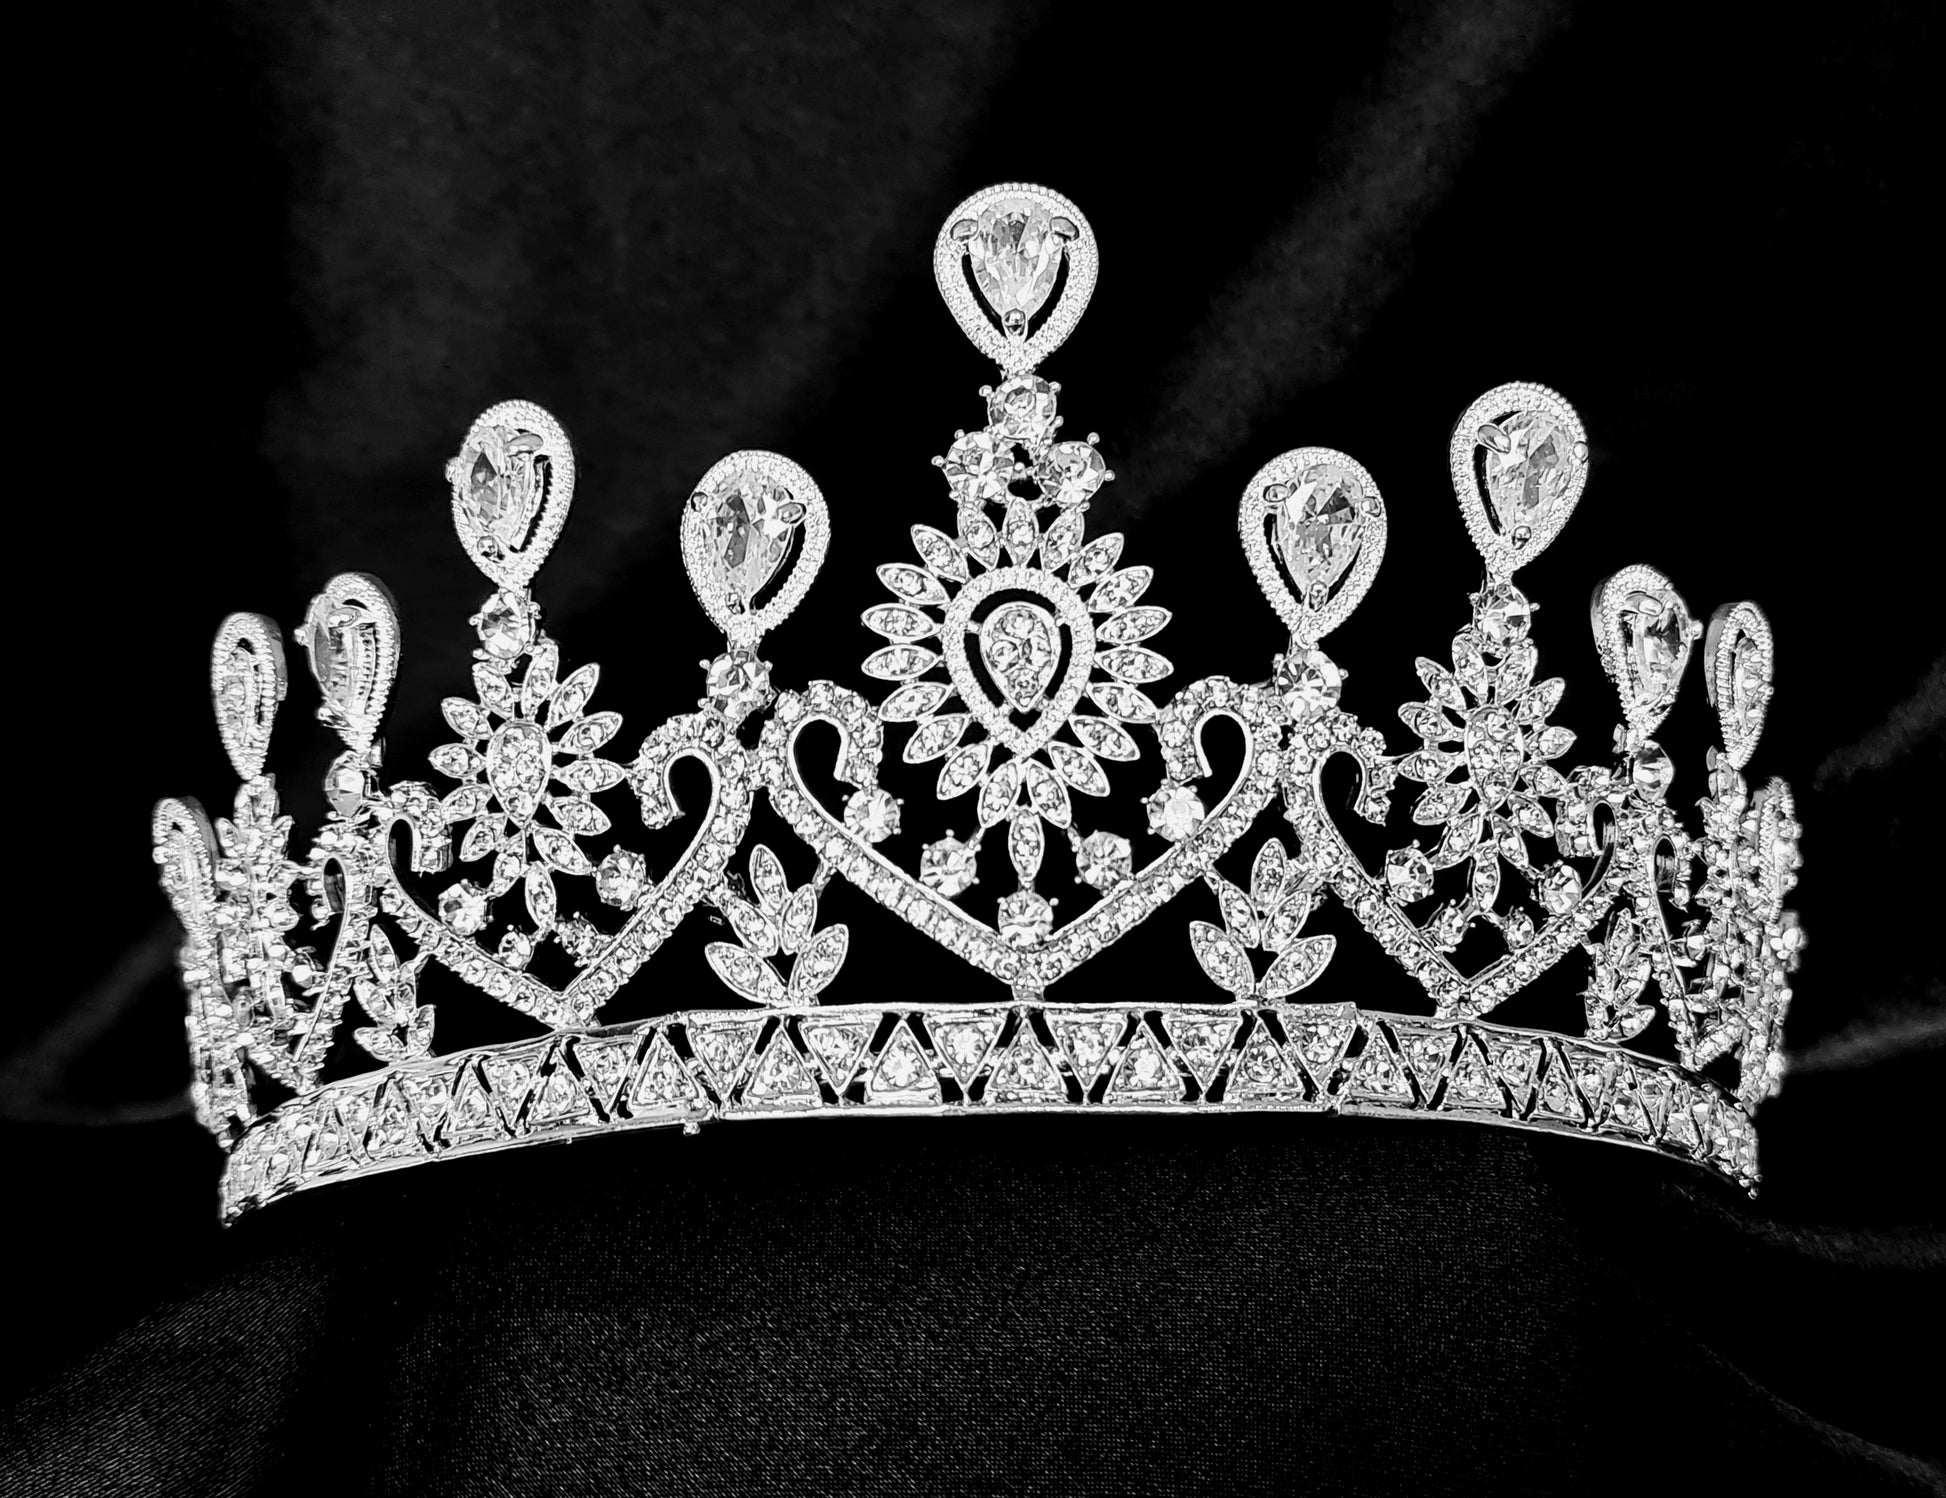 A close-up of a crown with diamonds on a black background. The crown is made of silver and is decorated with cubic zirconia stones, The stones are arranged in a pattern that resembles a flower, The crown is sitting on a black background.